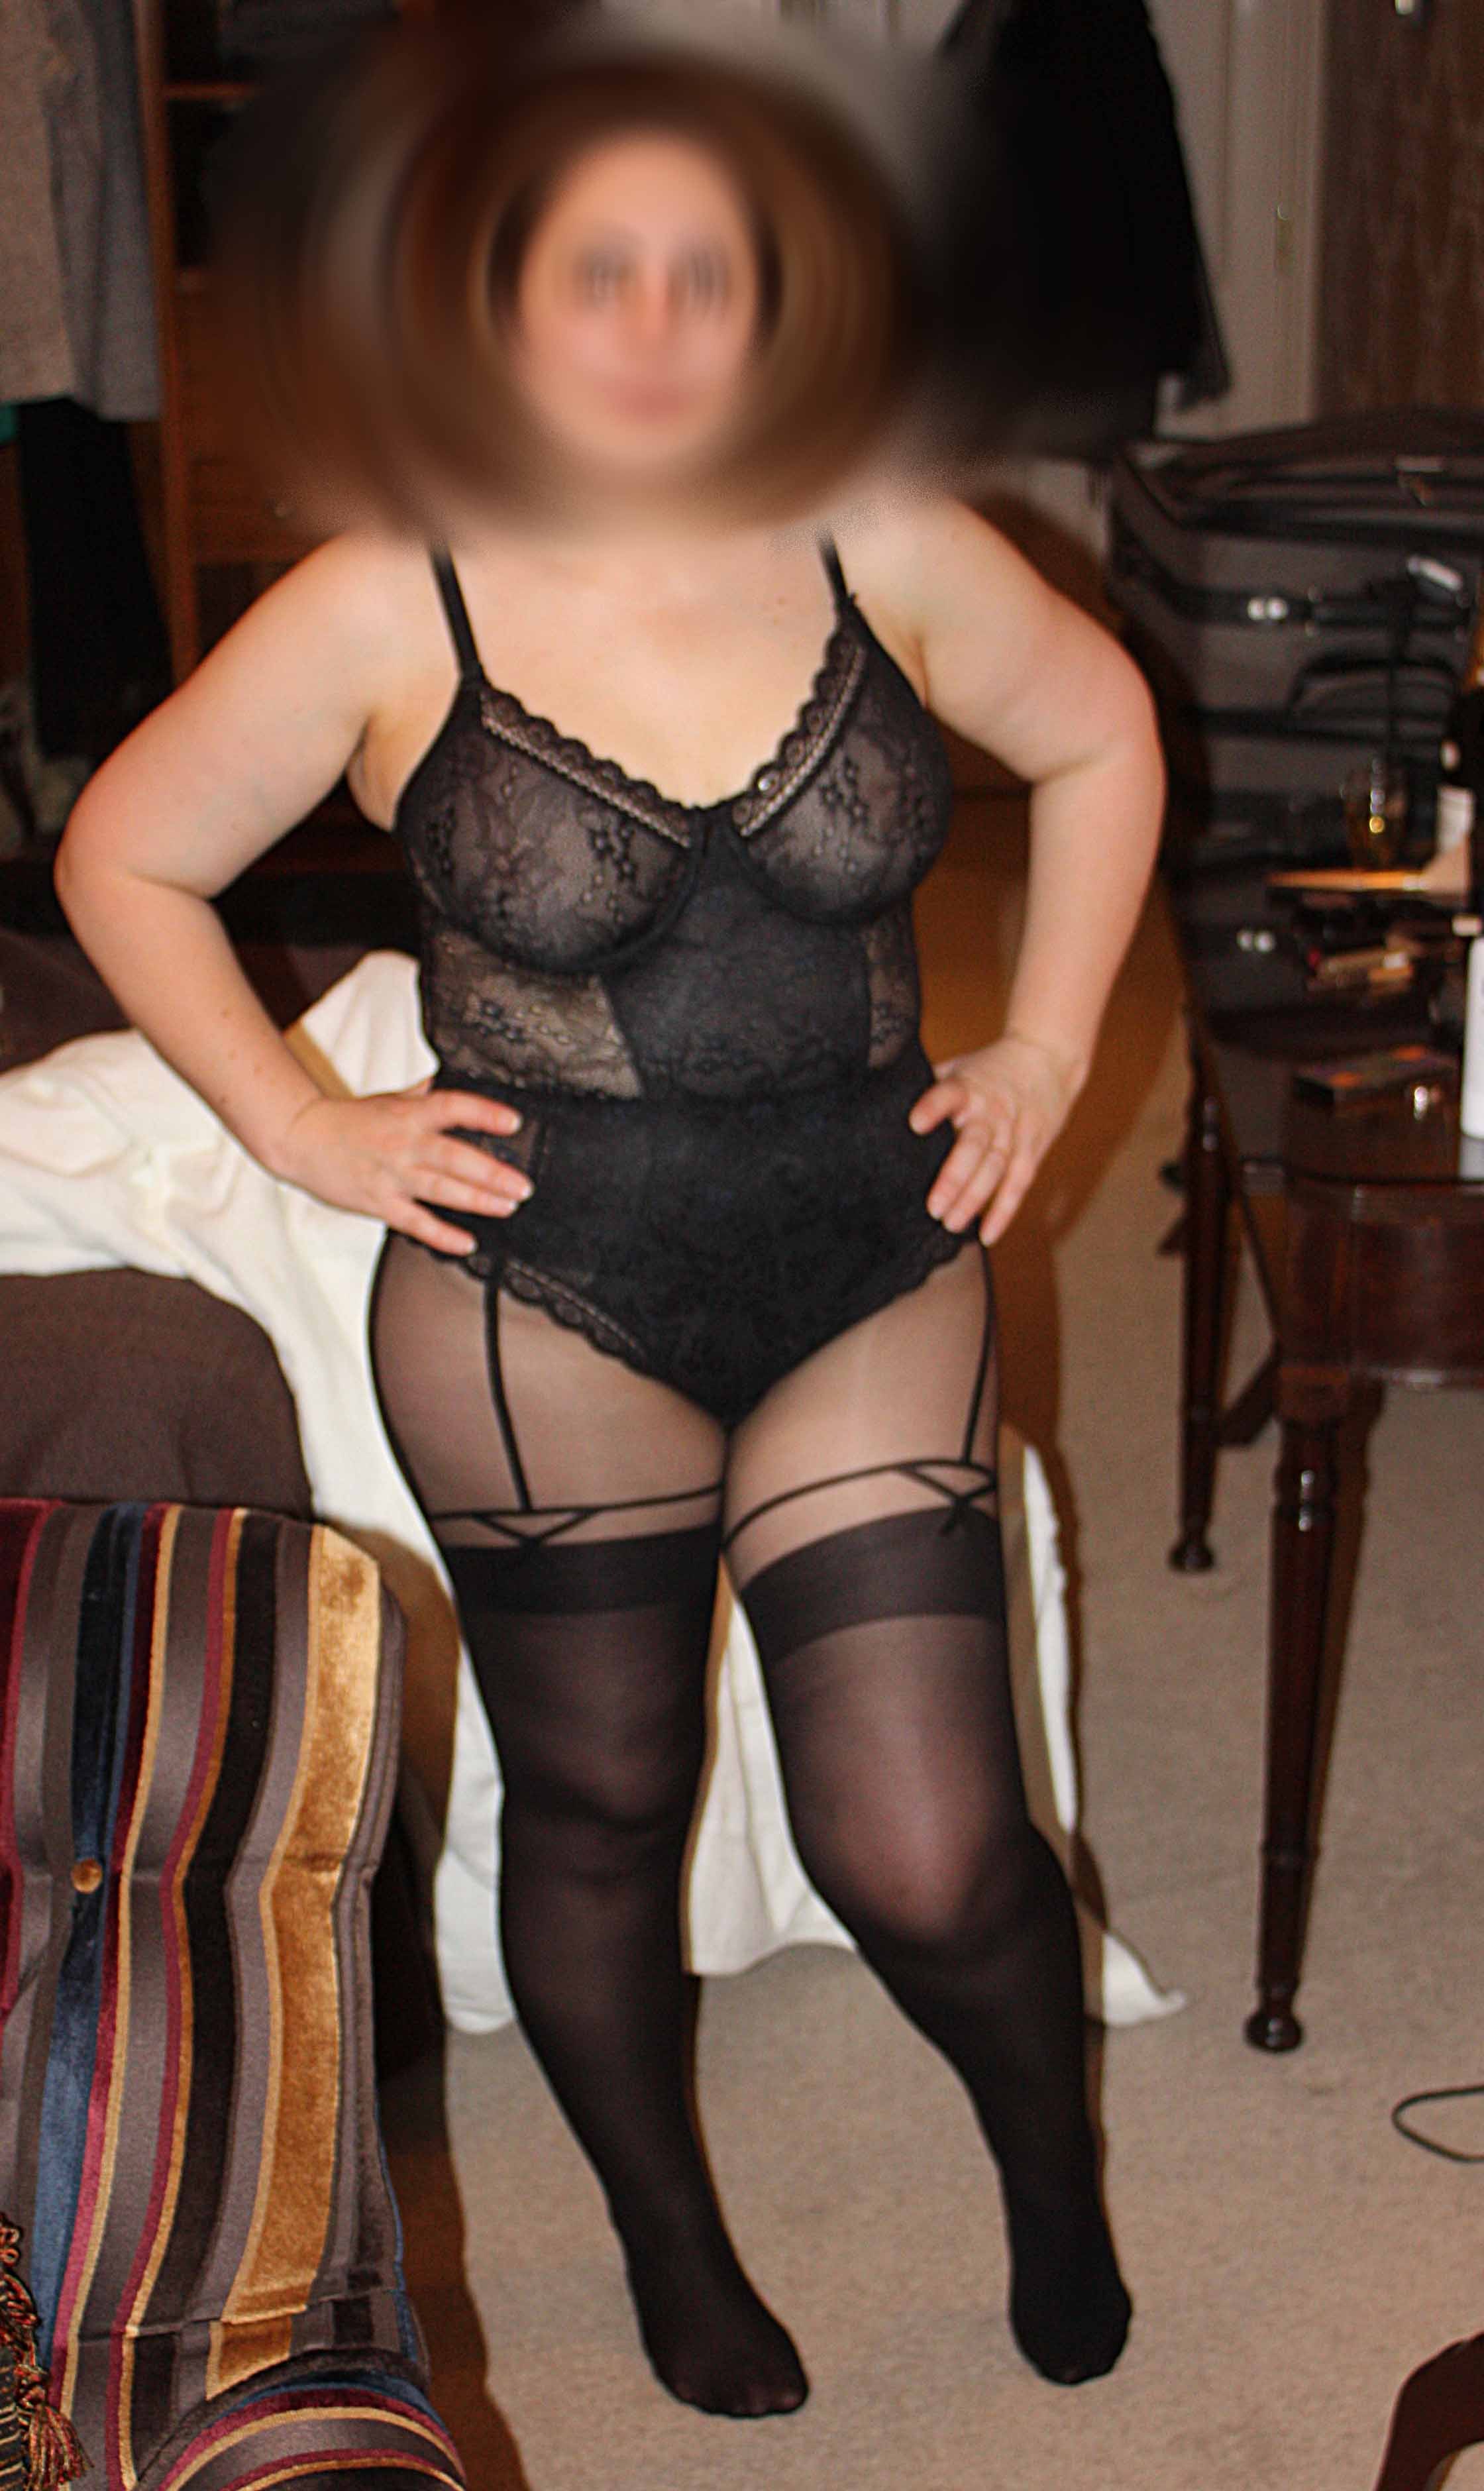 chubby escort lady in lingerie